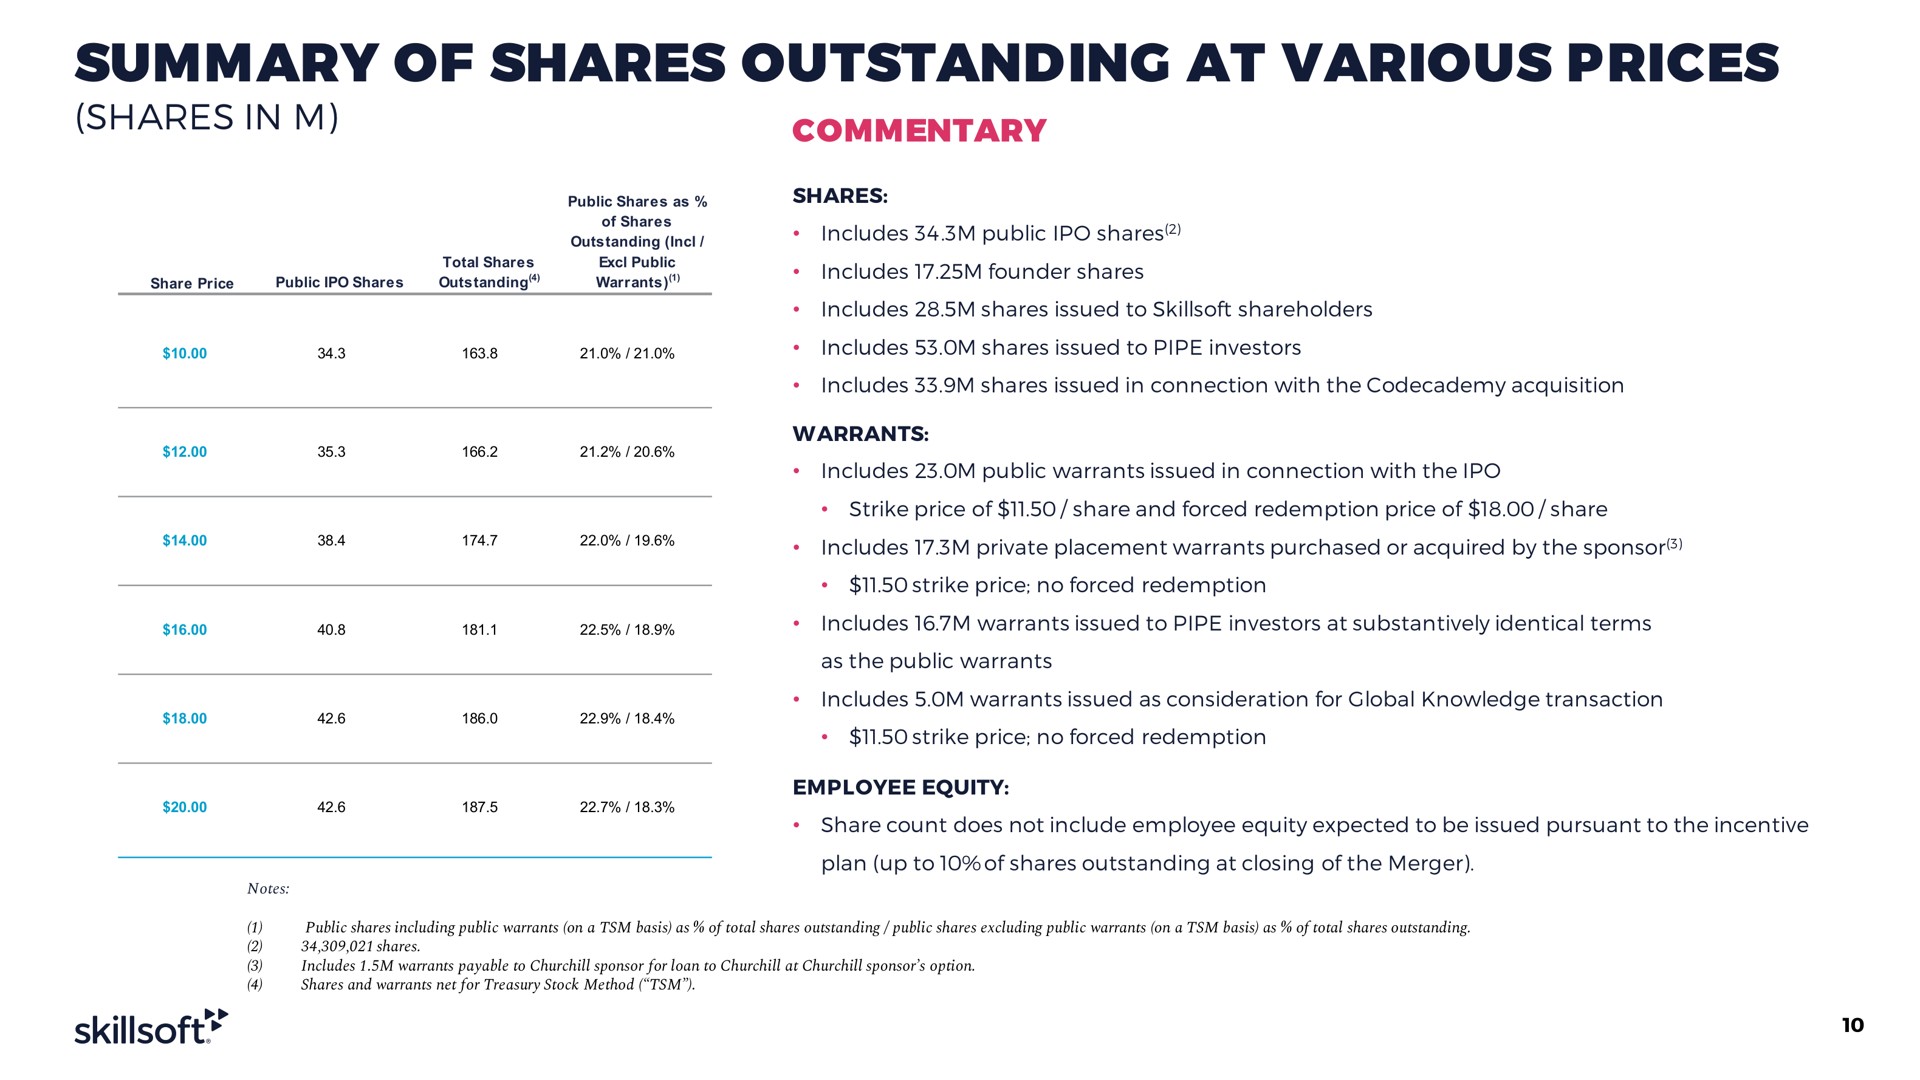 summary of shares outstanding at various prices | Skillsoft